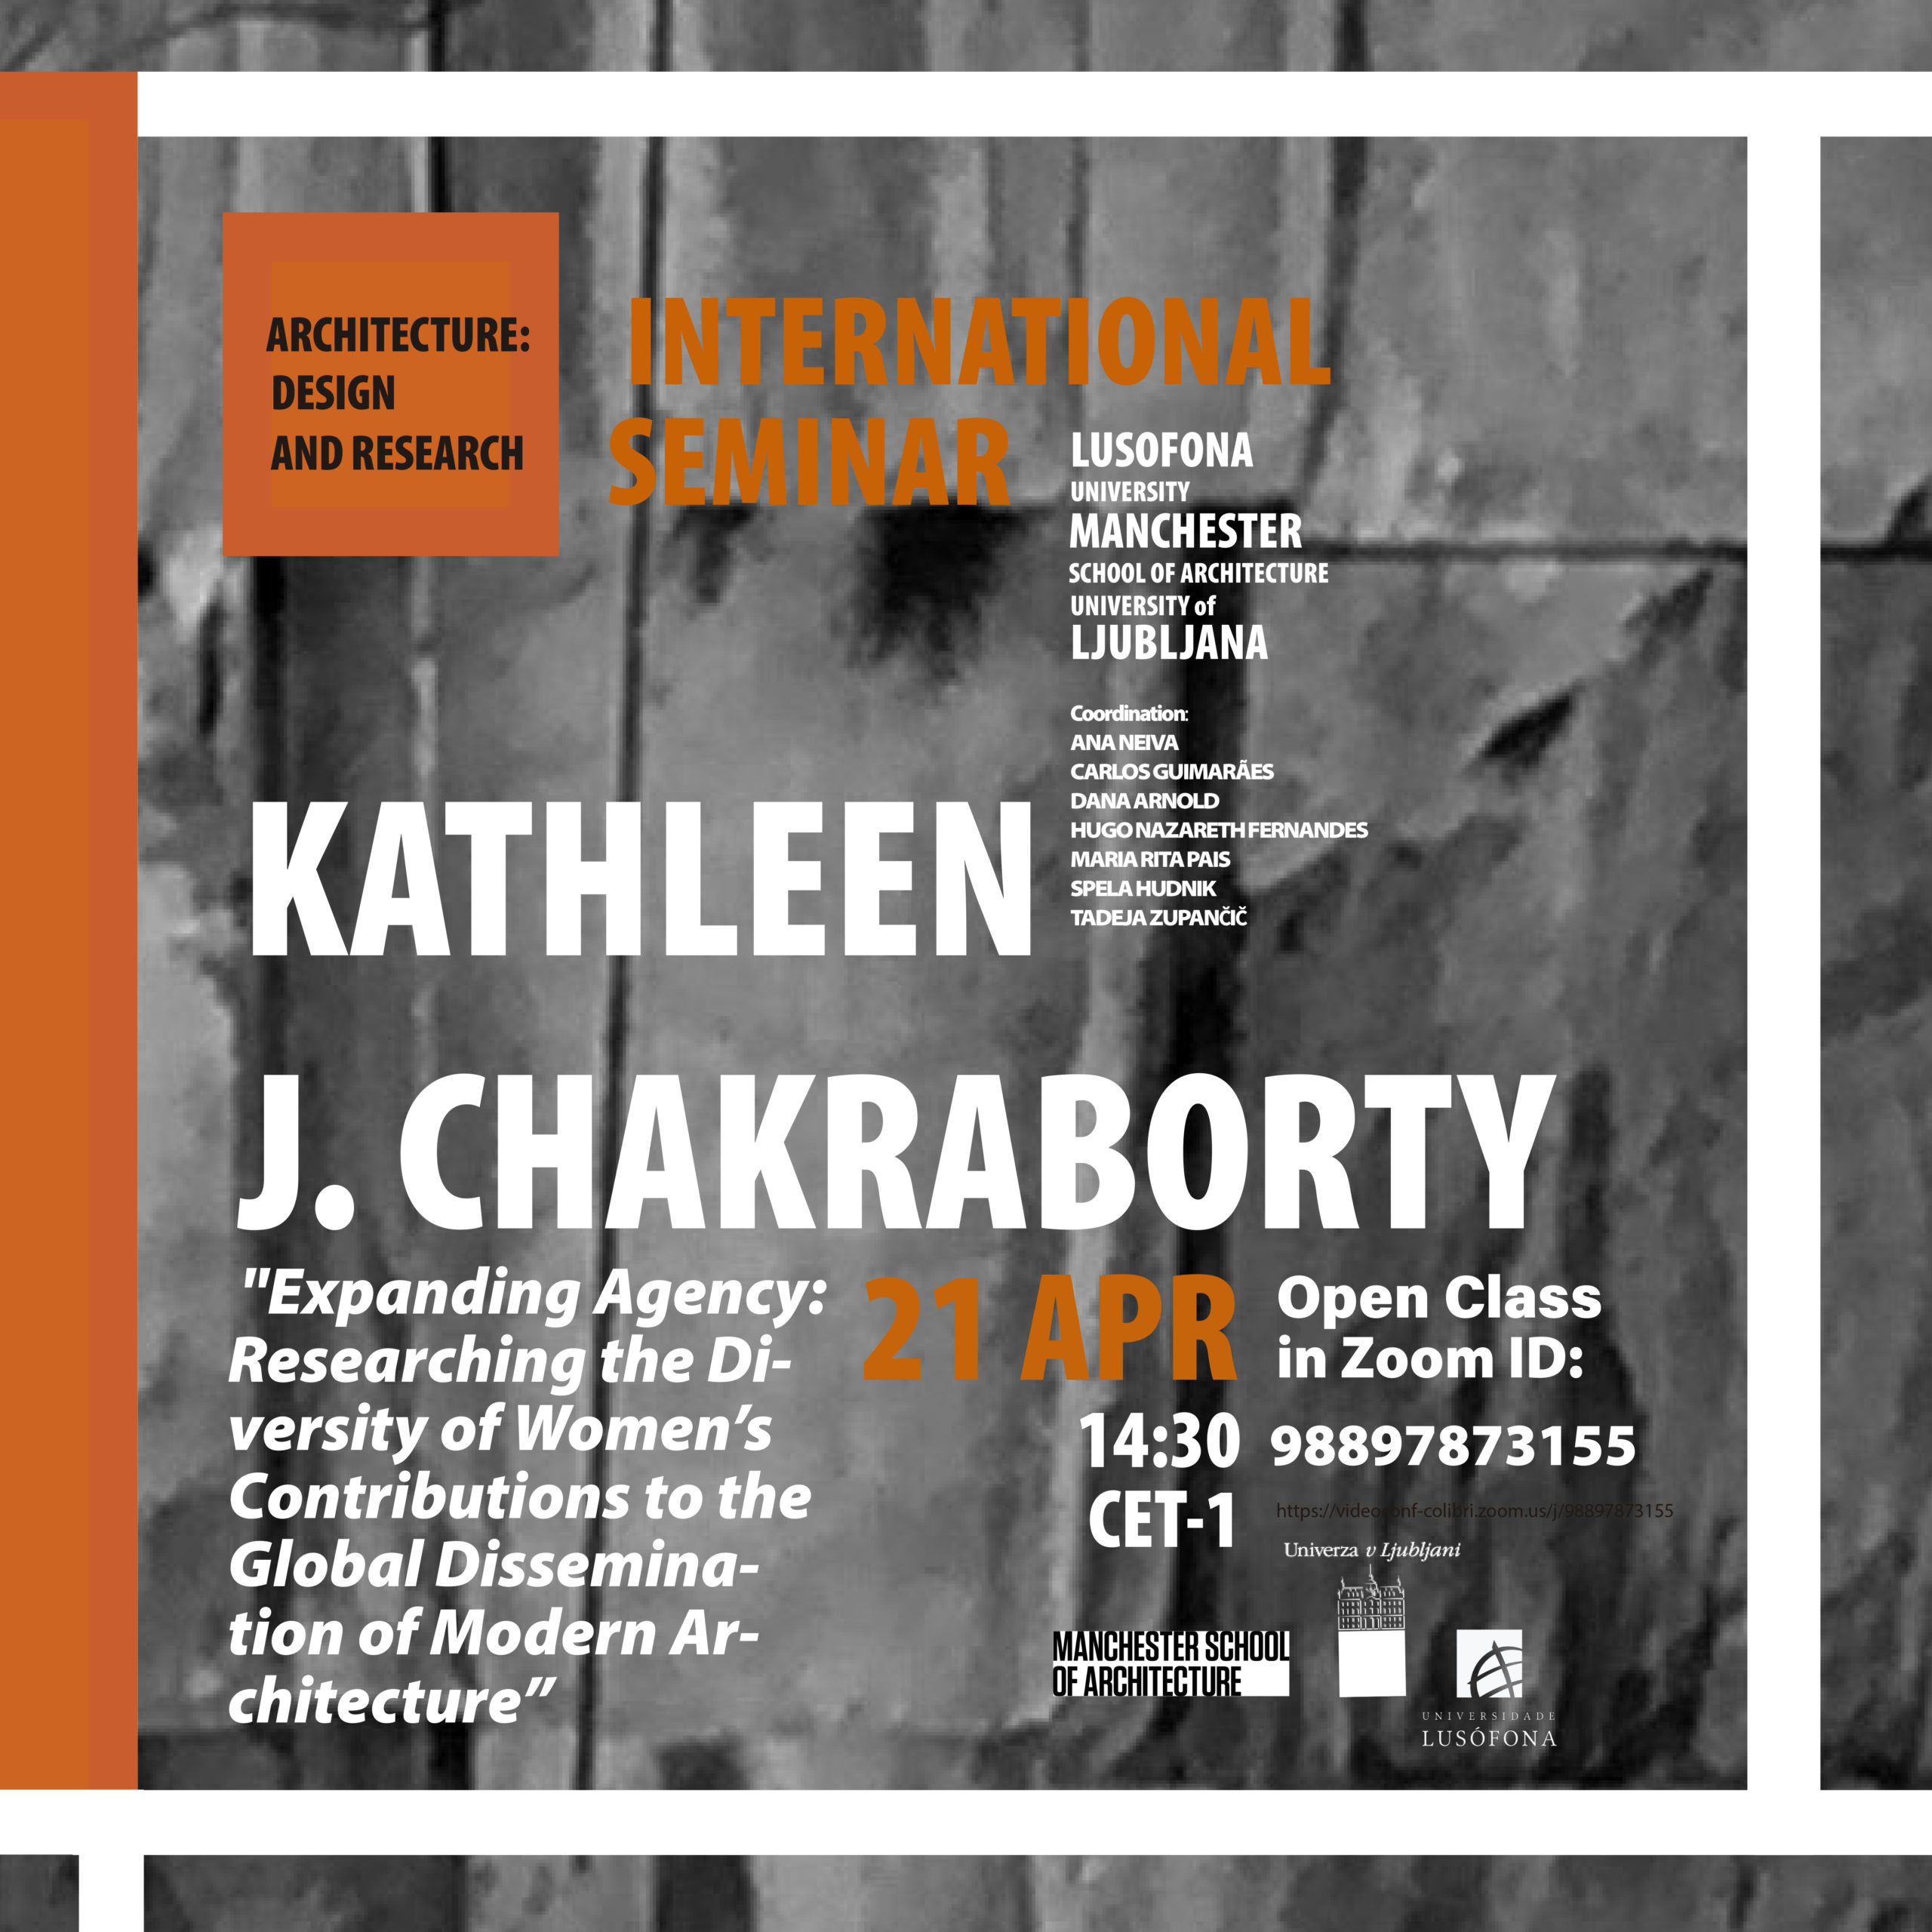 Kathleen Chakraborty – “Expanding Agency: Researching the Diversity of Women’s Contributions to the Global Dissemination of Modern Architecture”